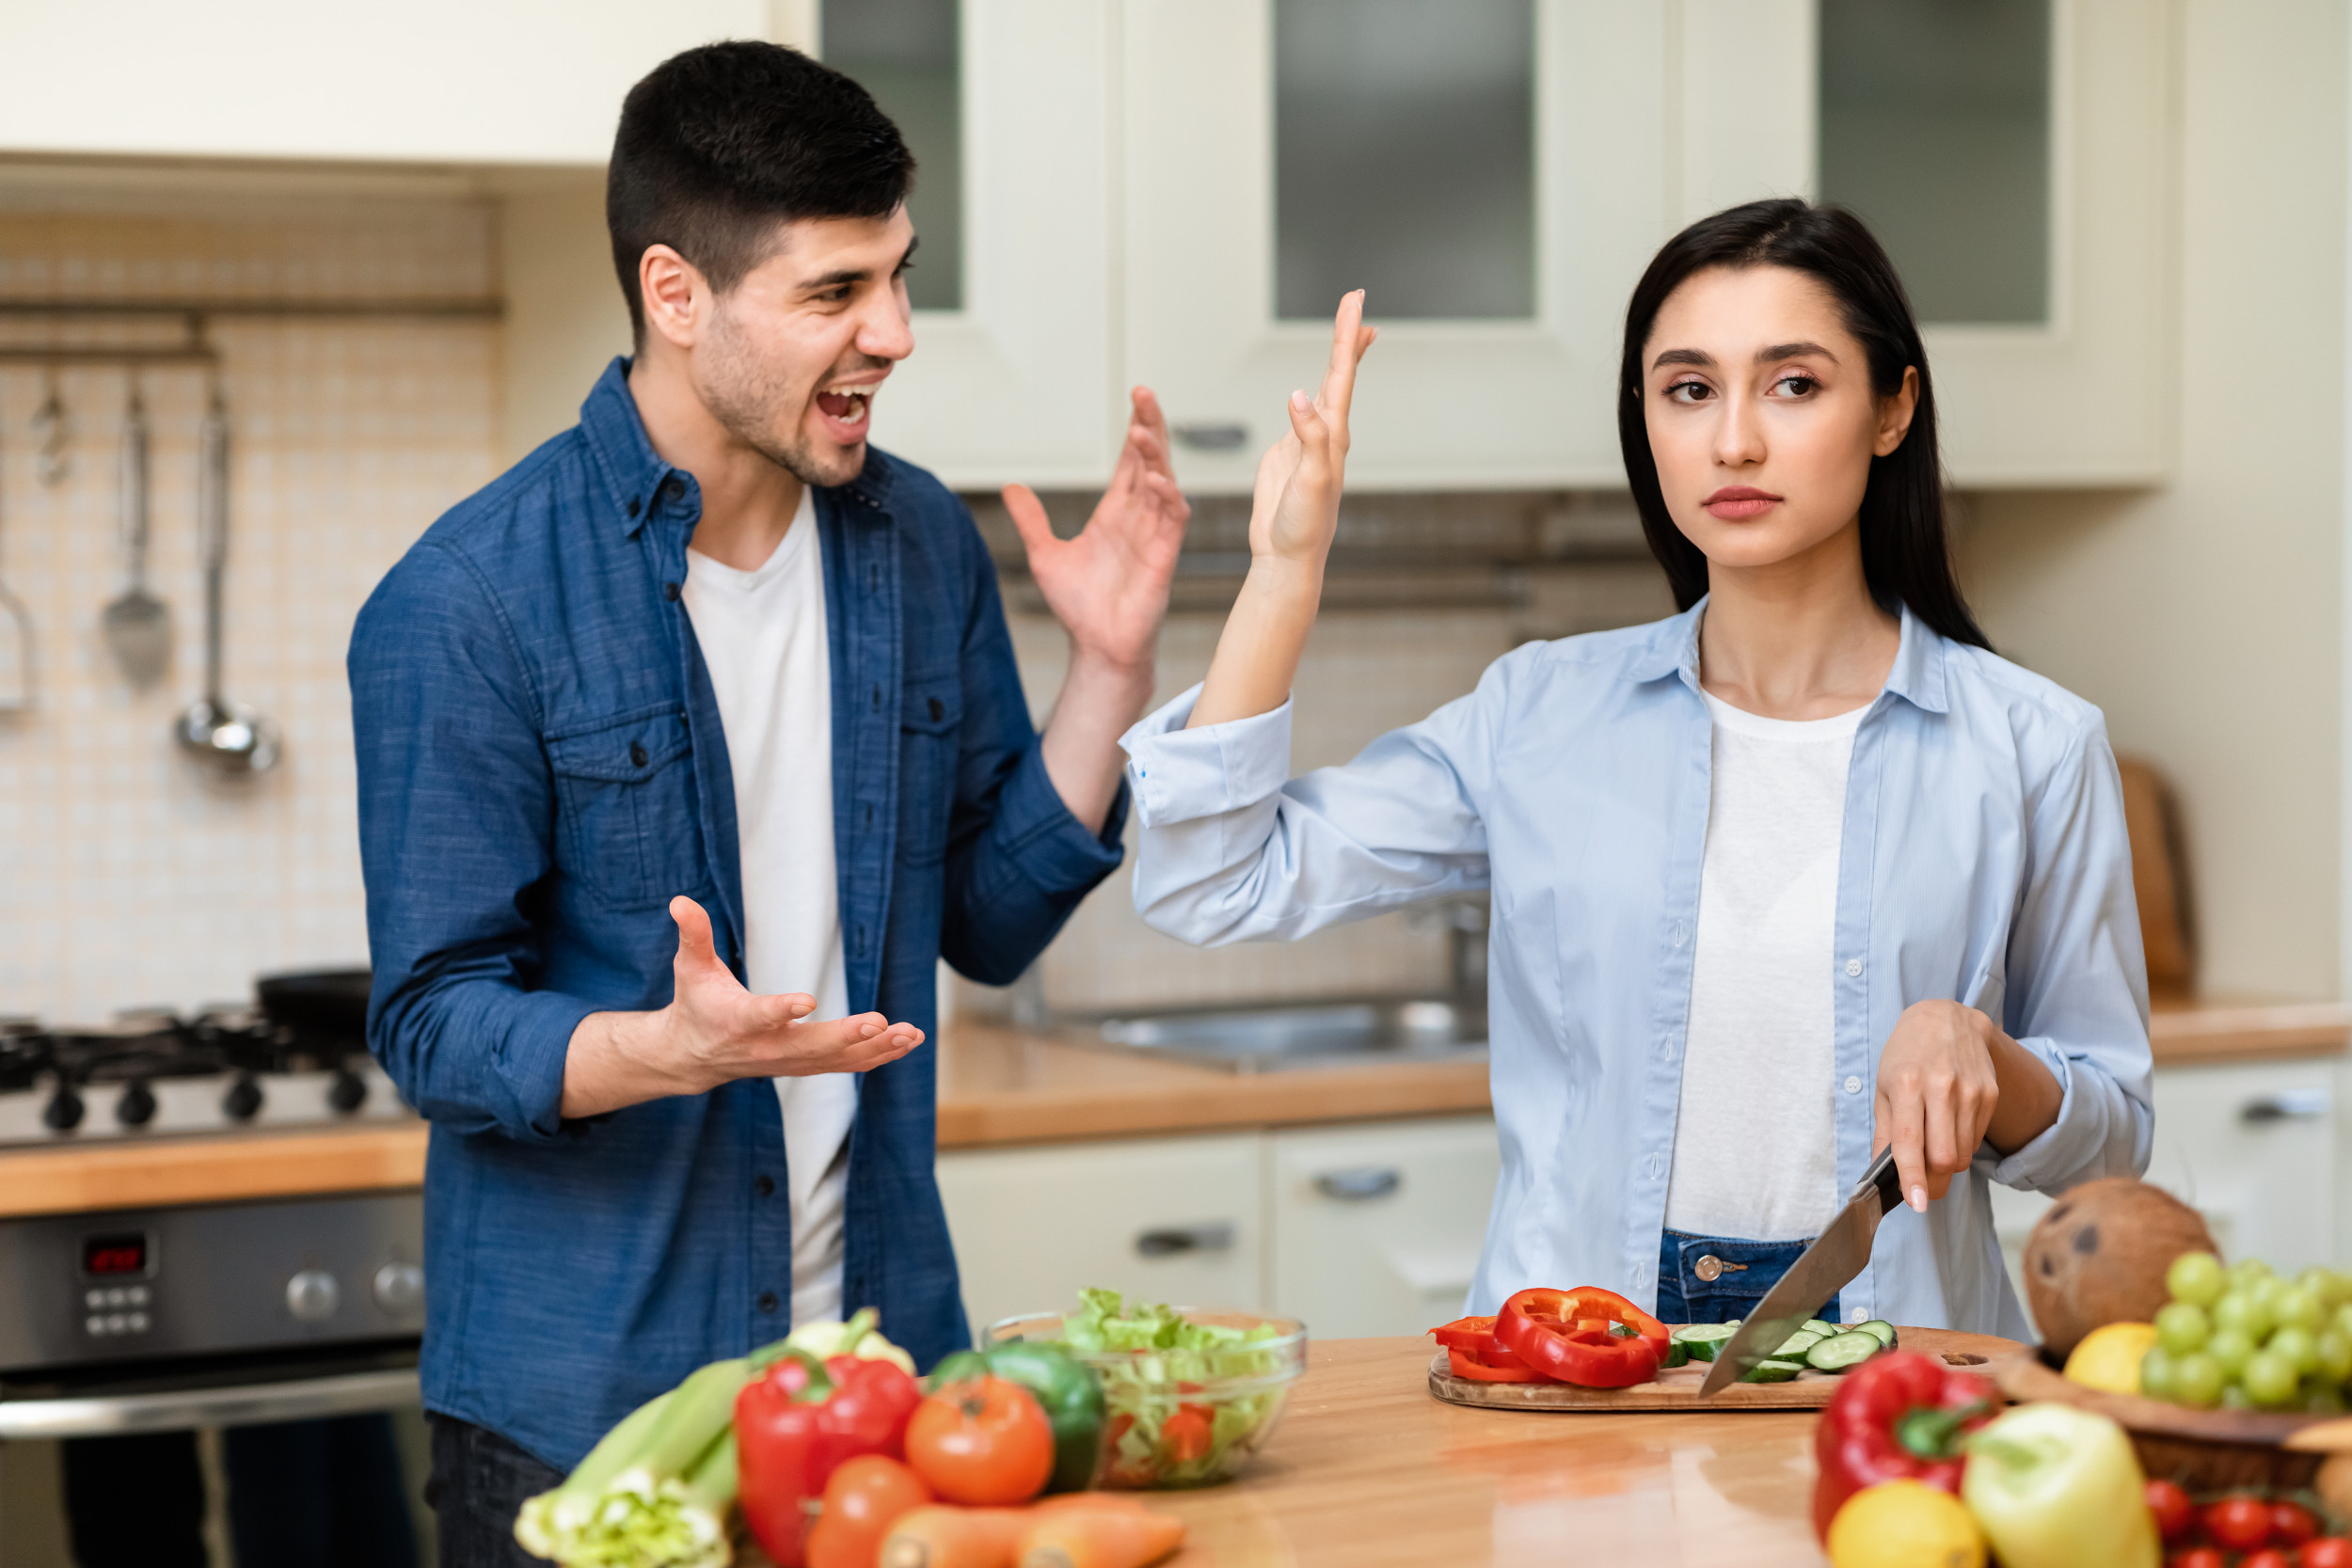 Man Dragged For Harsh Criticism of Partner’s Cooking